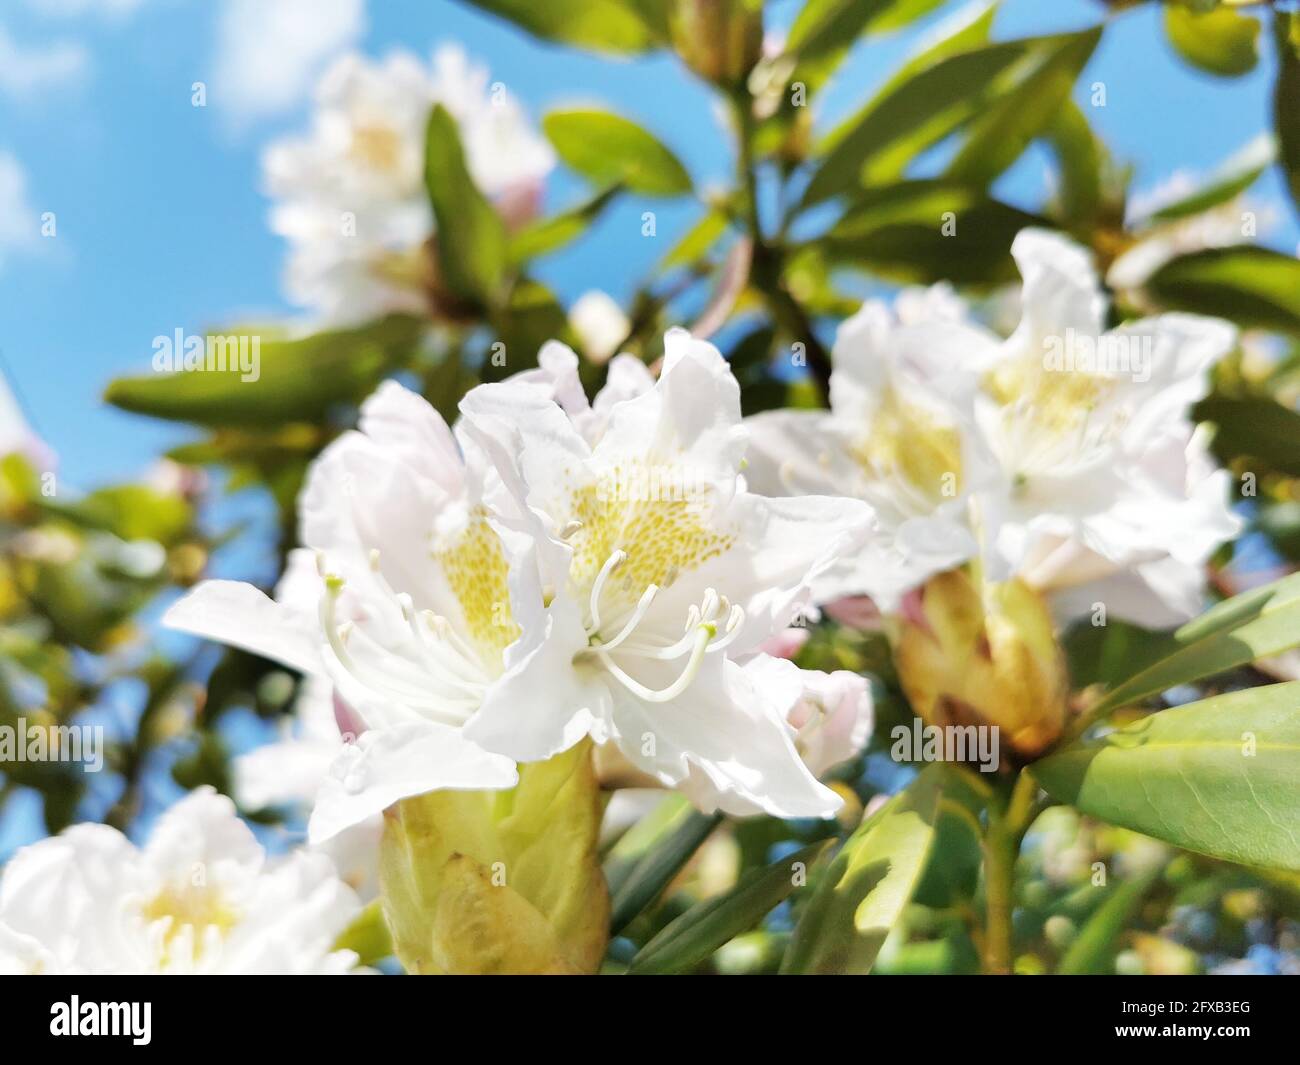 Closeup shot of a great rhododendron blossoms Stock Photo